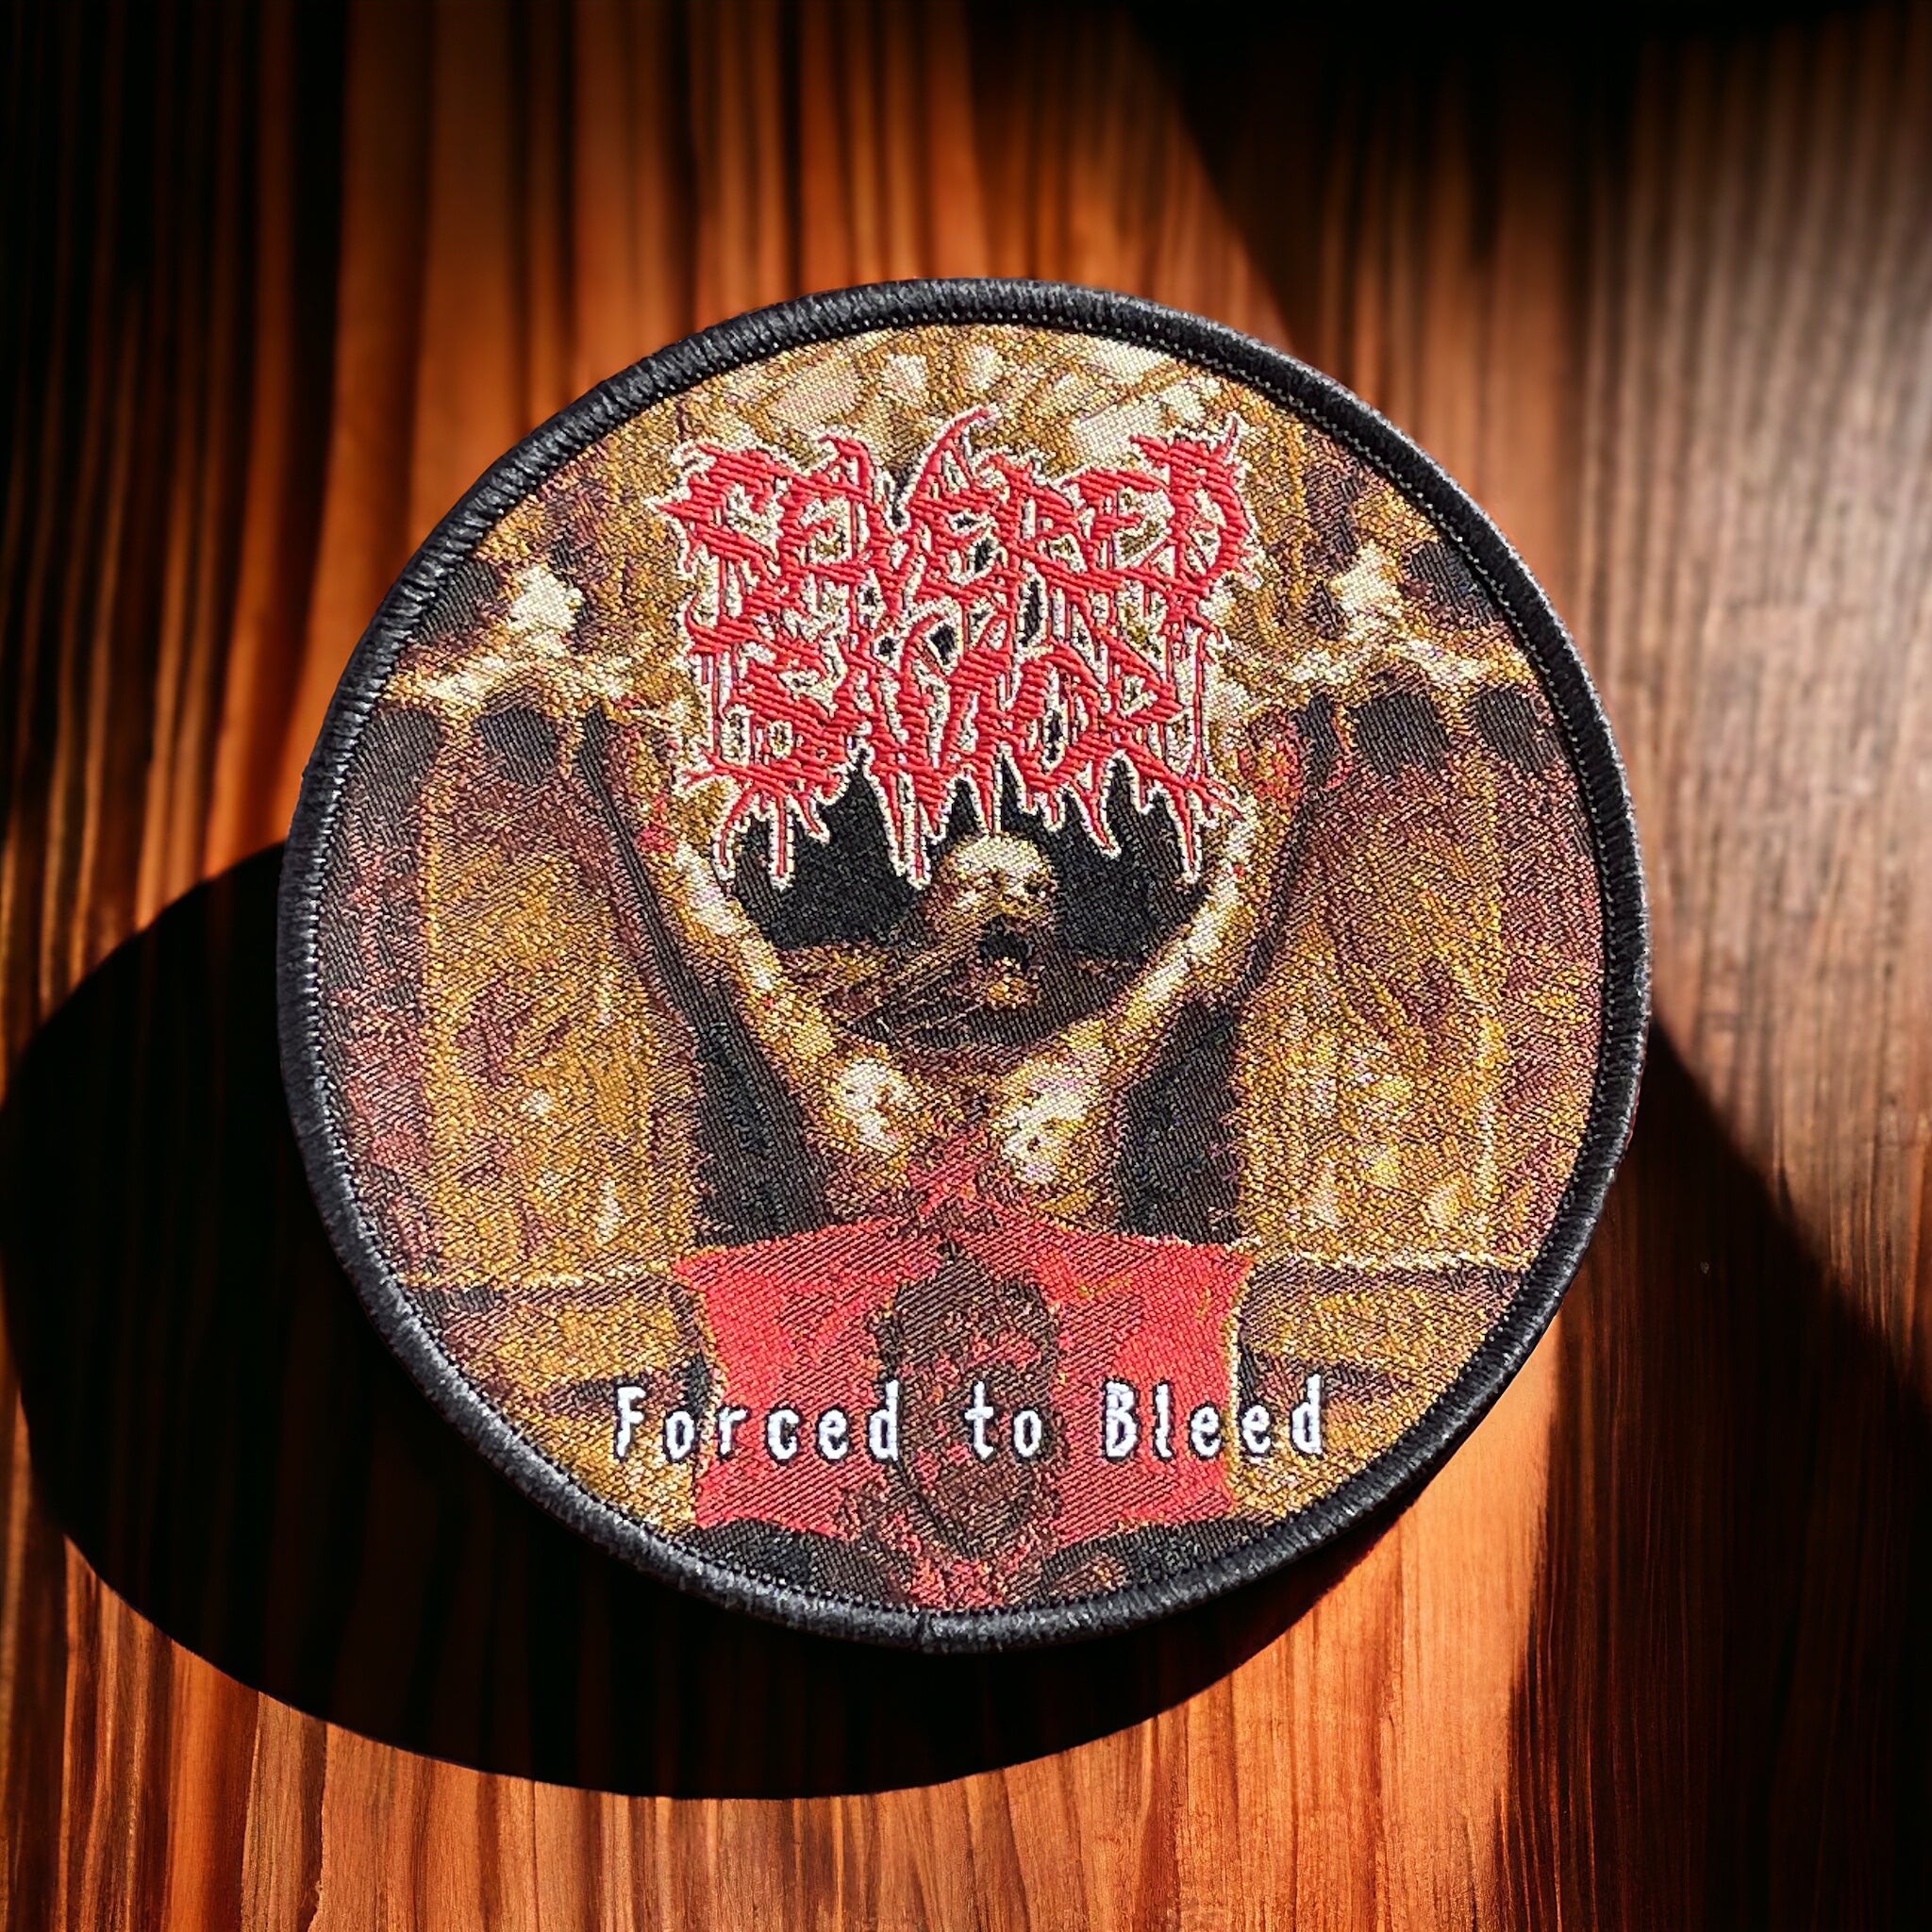 Severed Savior - Round Forced to Bleed Patch - Black Border